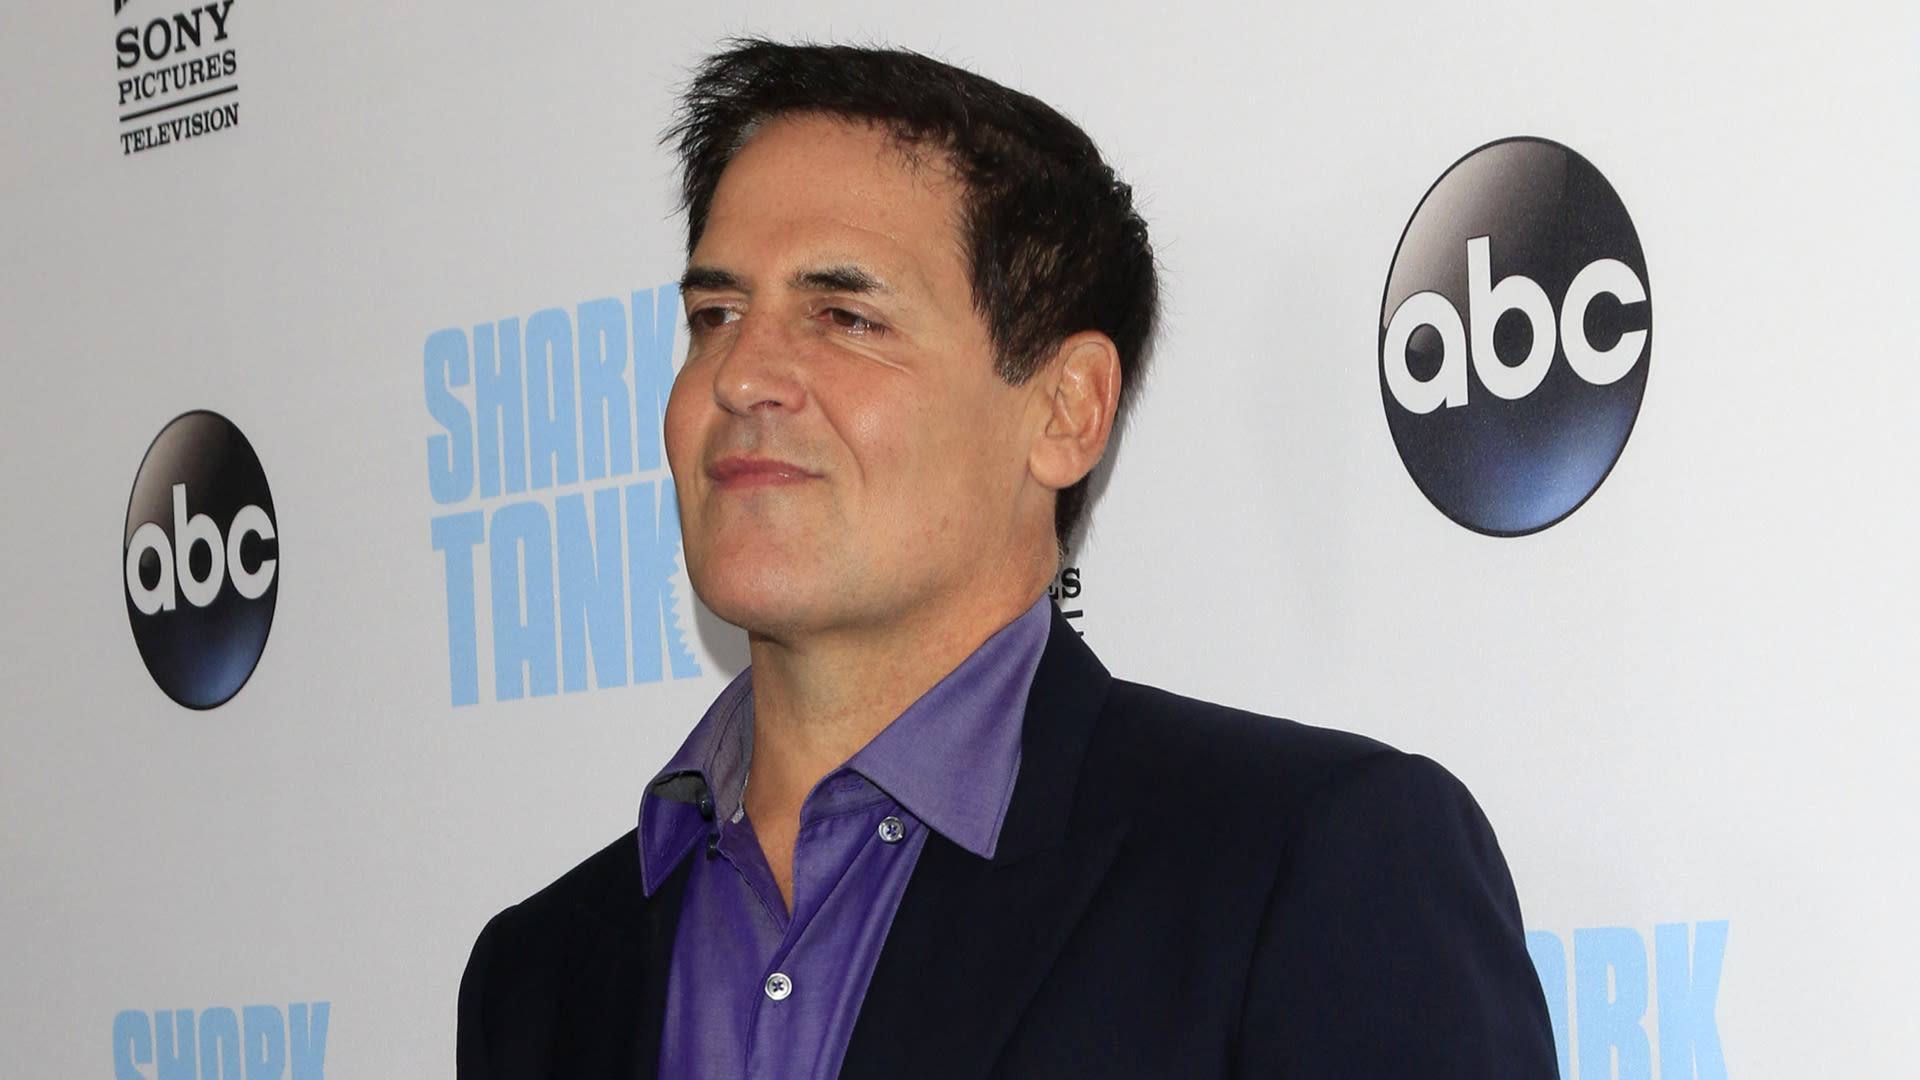 Mark Cuban’s Genius Money Move Made Him Over $2 Billion: 4 Lessons You Can Learn